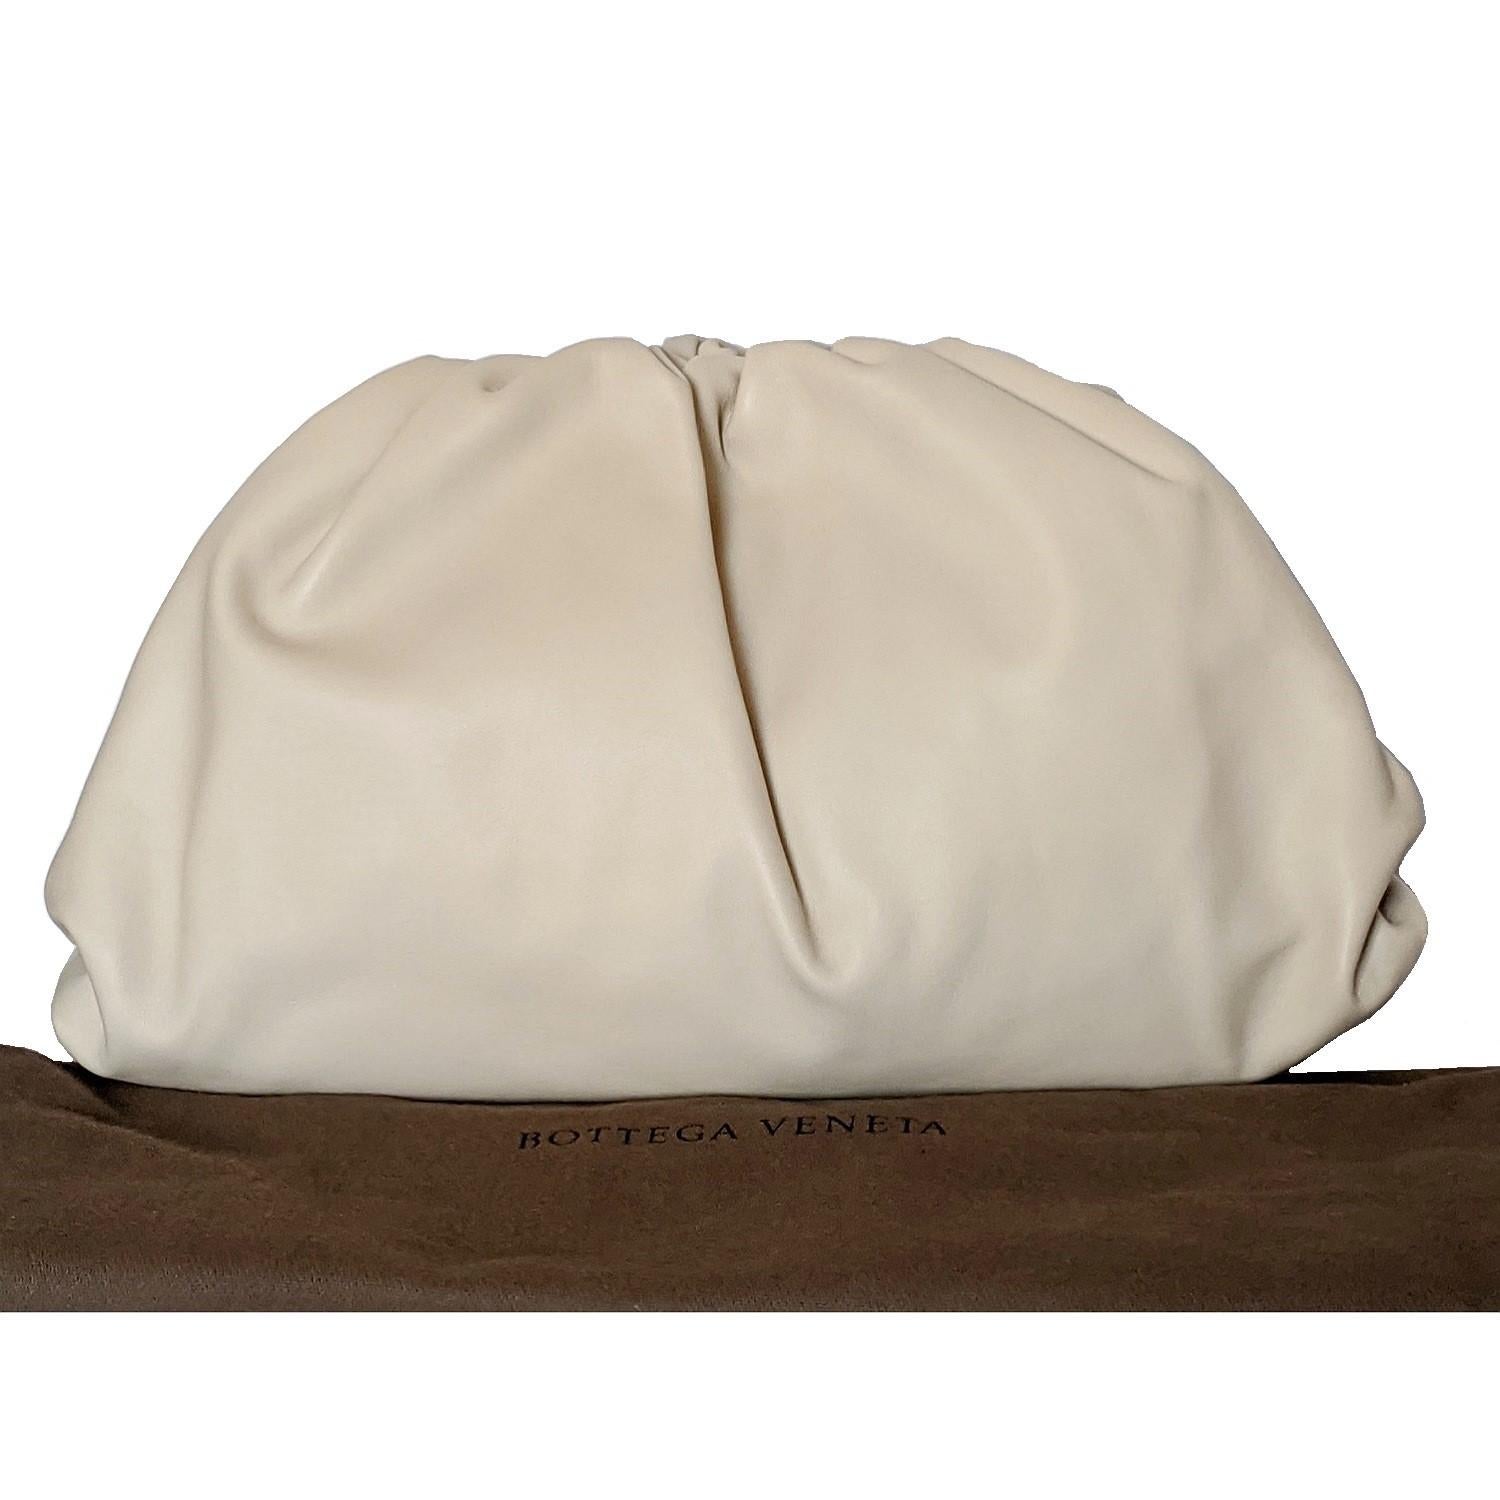 This Soft voluminous clutch with a magnetic frame covered in folds of Nappa leather is a must have to add to your collection. It's roomier than a traditional clutch, and its simplicity makes it a classic investment piece. Made in Italy. Retail price